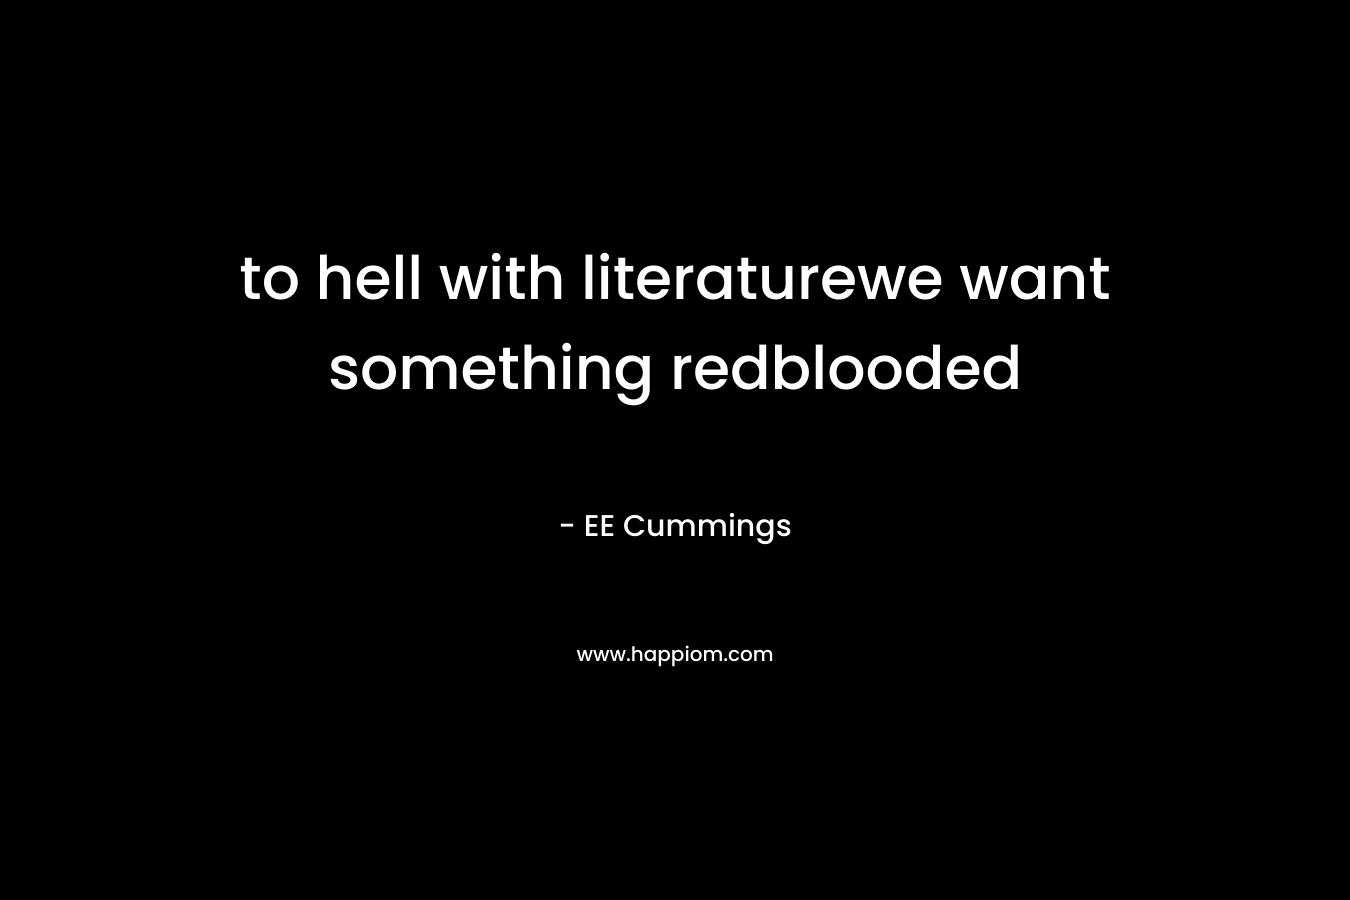 to hell with literaturewe want something redblooded